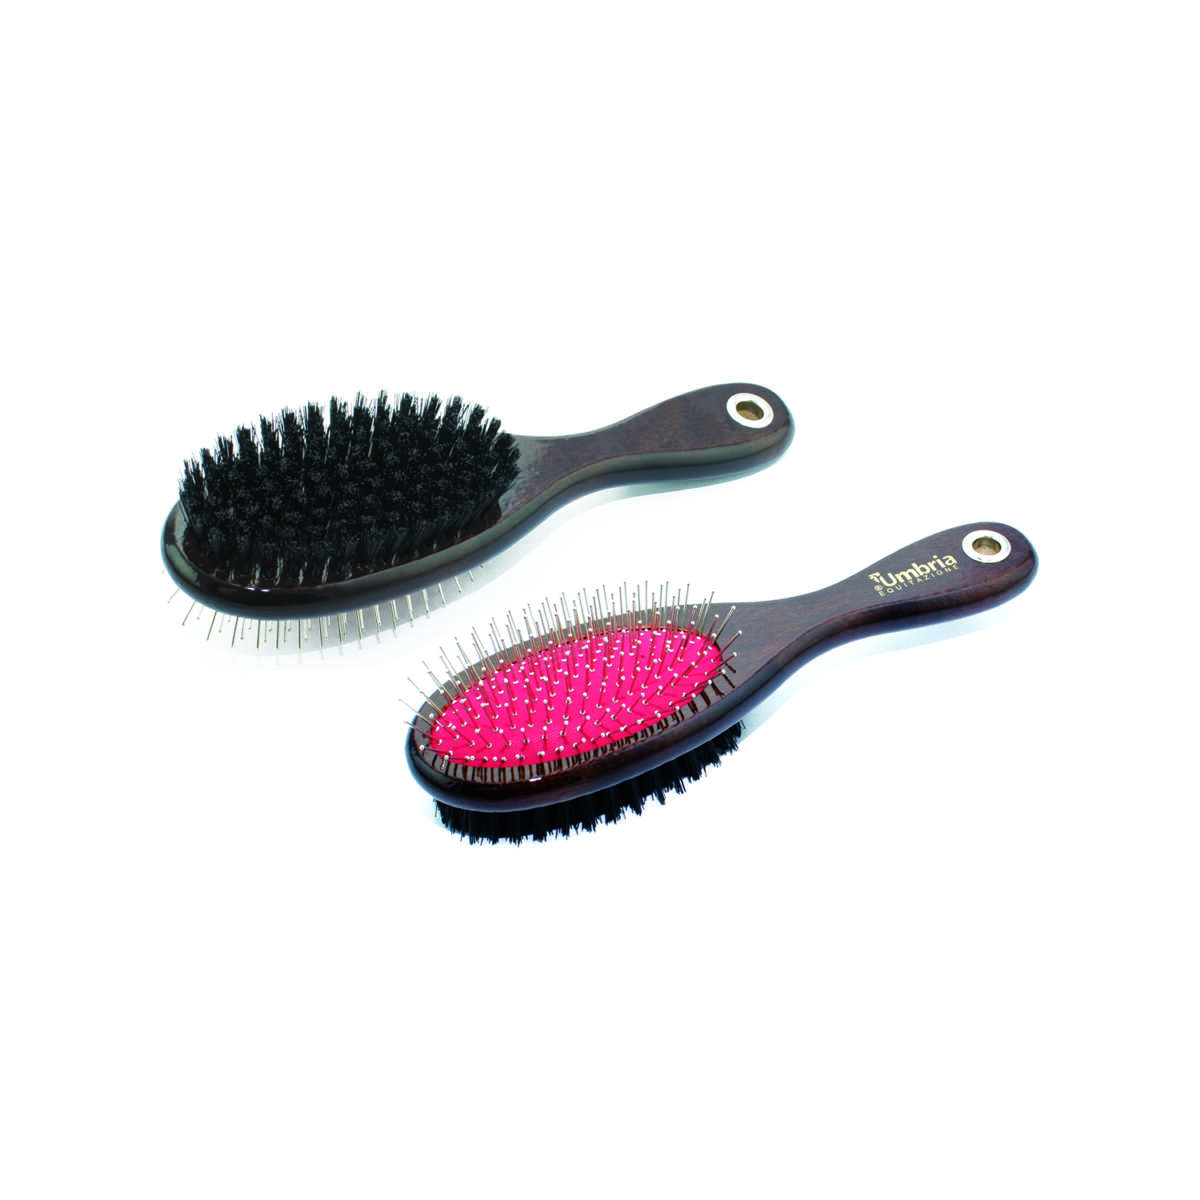 0021526_wooden-mane-and-tail-brush-with-handle_ag00098